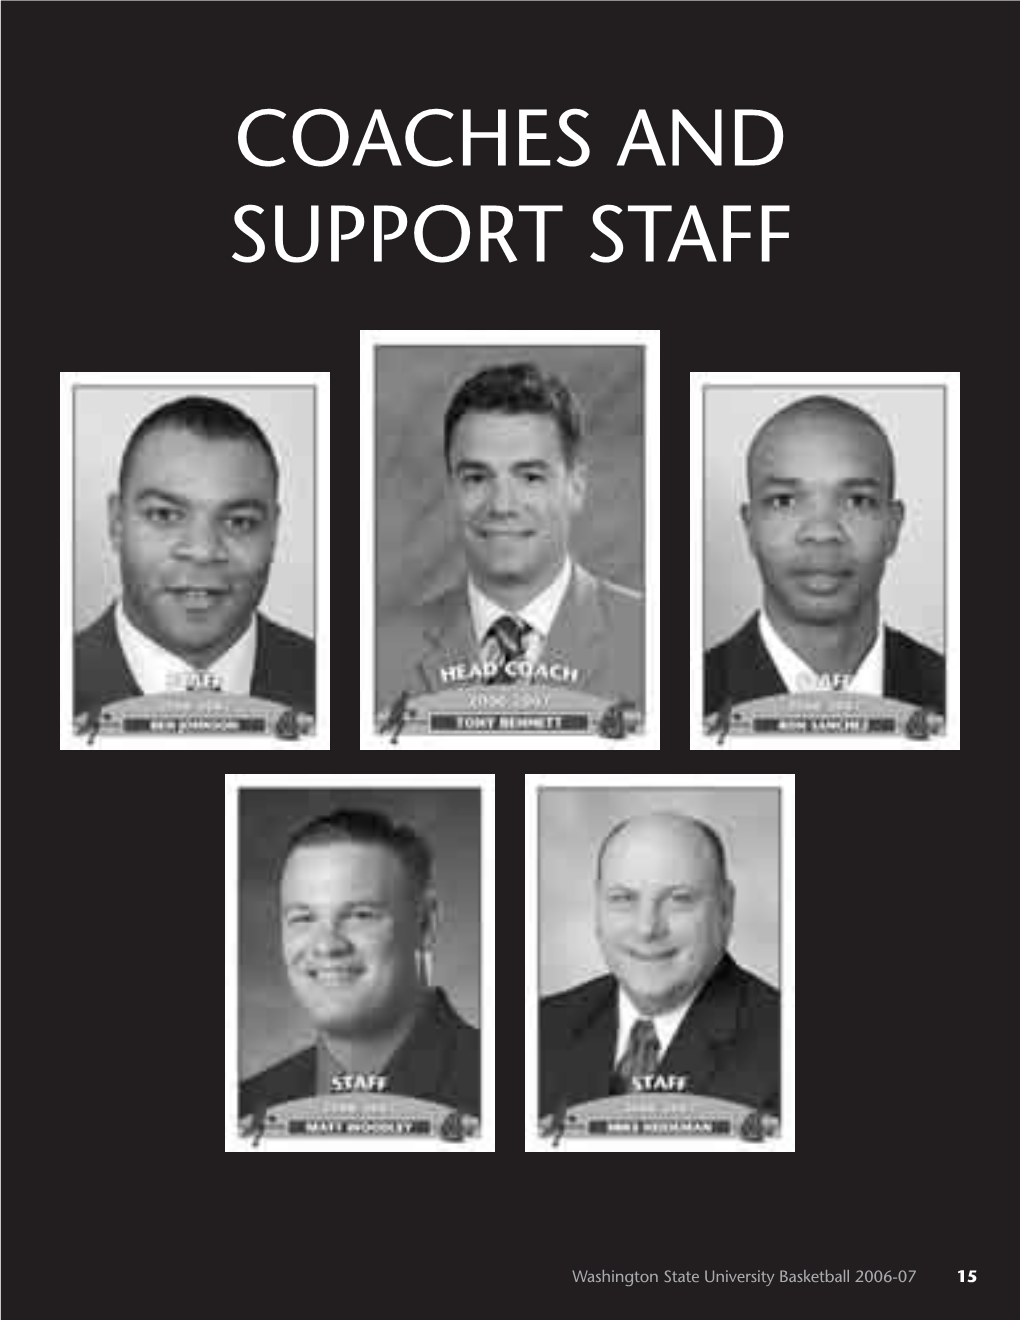 Coaches and Support Staff